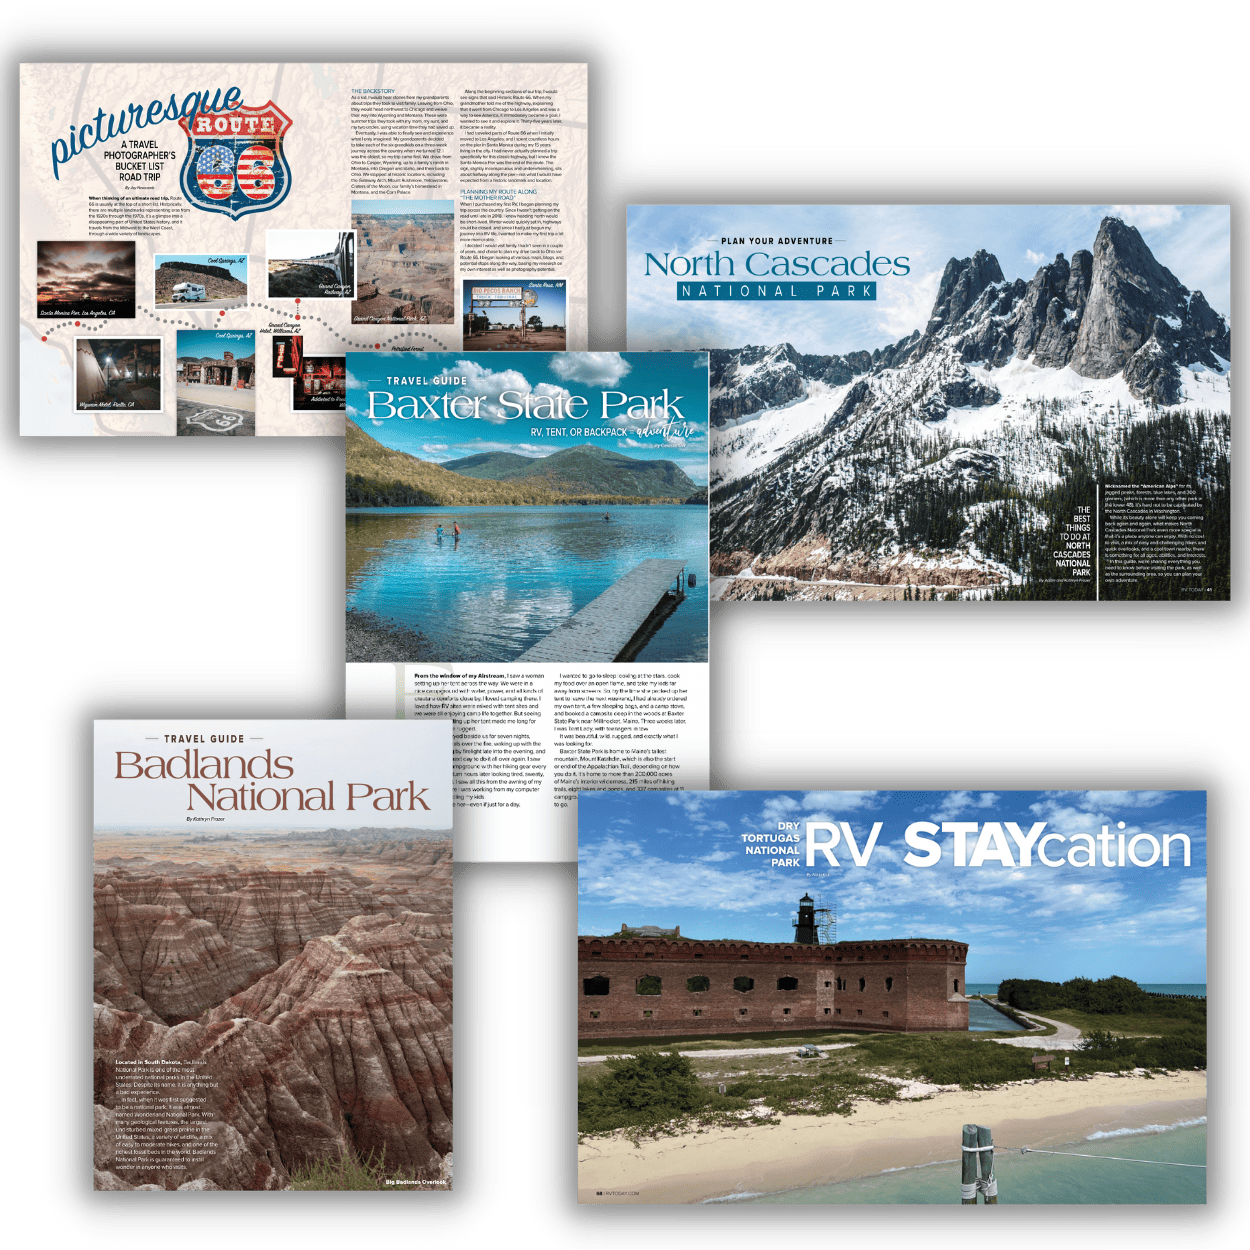 Stories in RV Today magazine of places to visit | RV Today